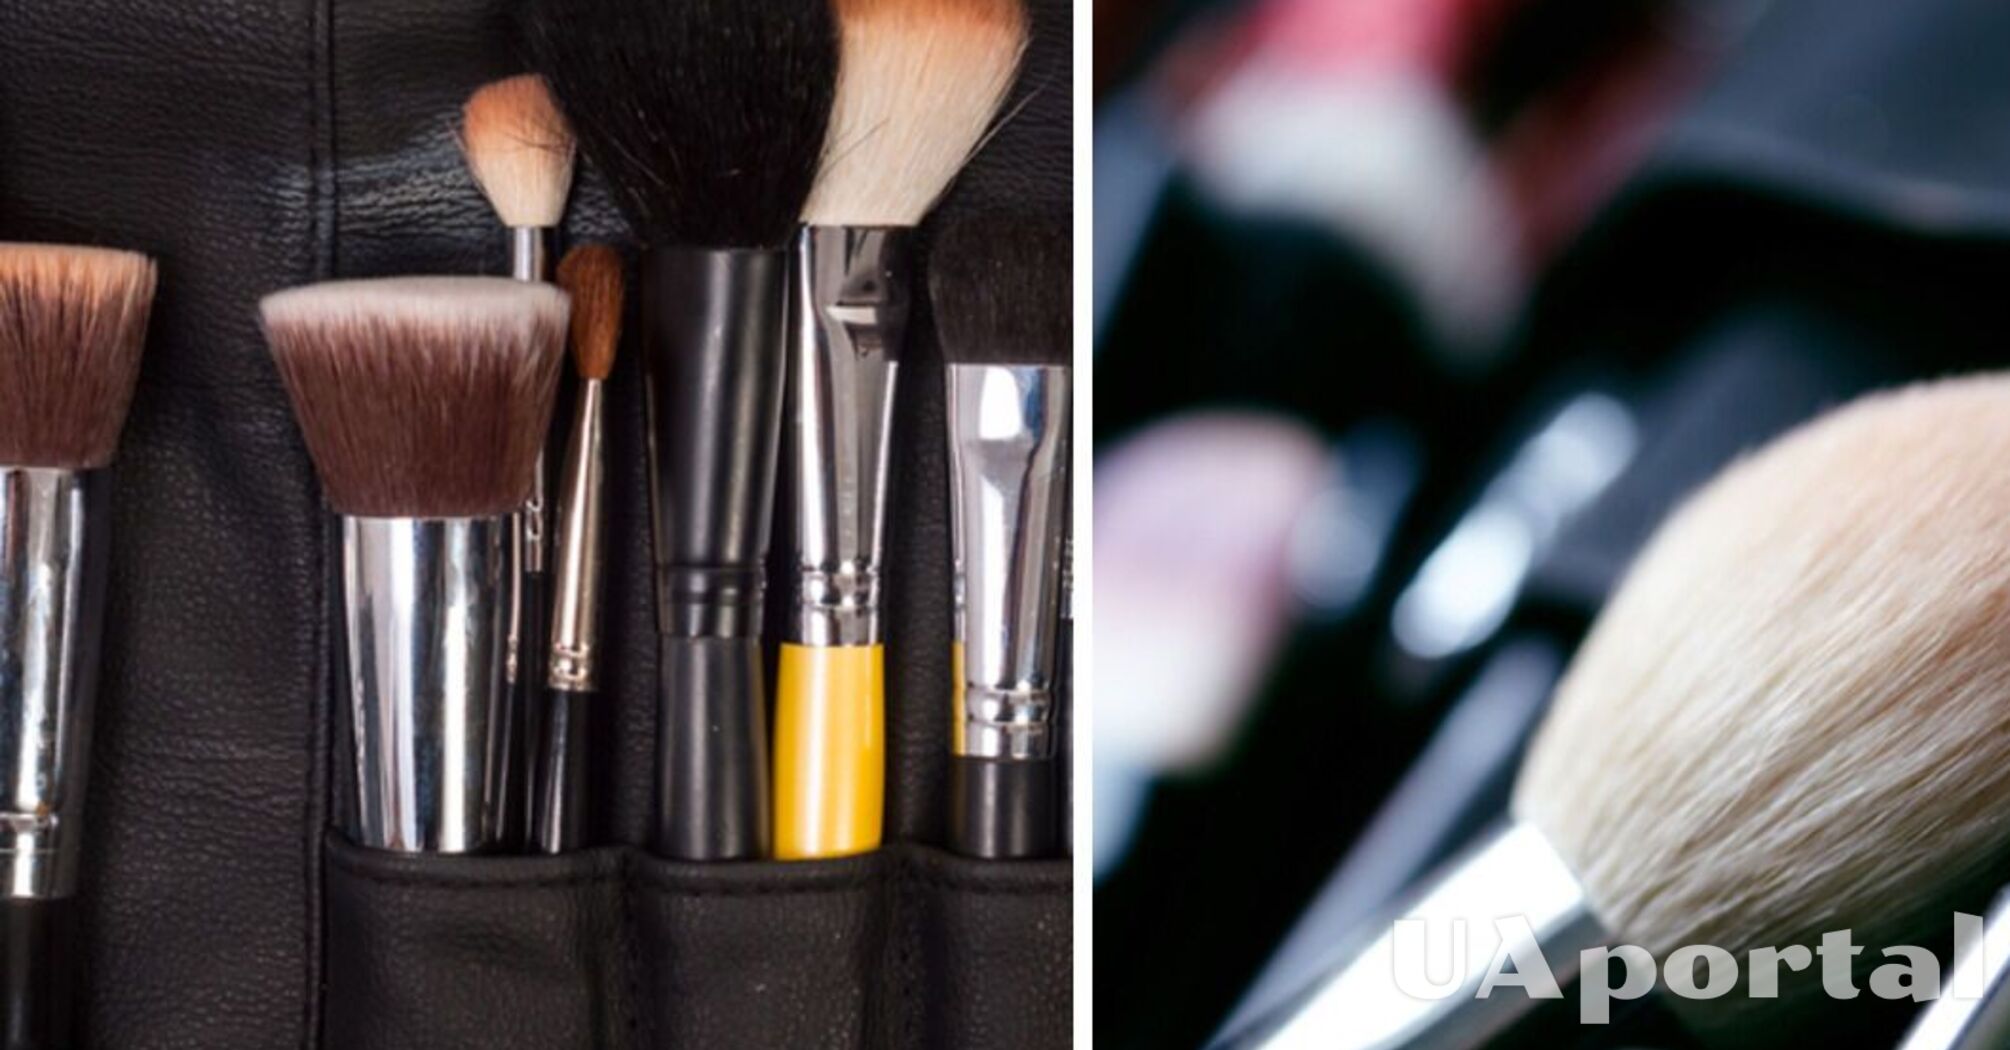 Keep your skin healthy: how to clean makeup brushes properly